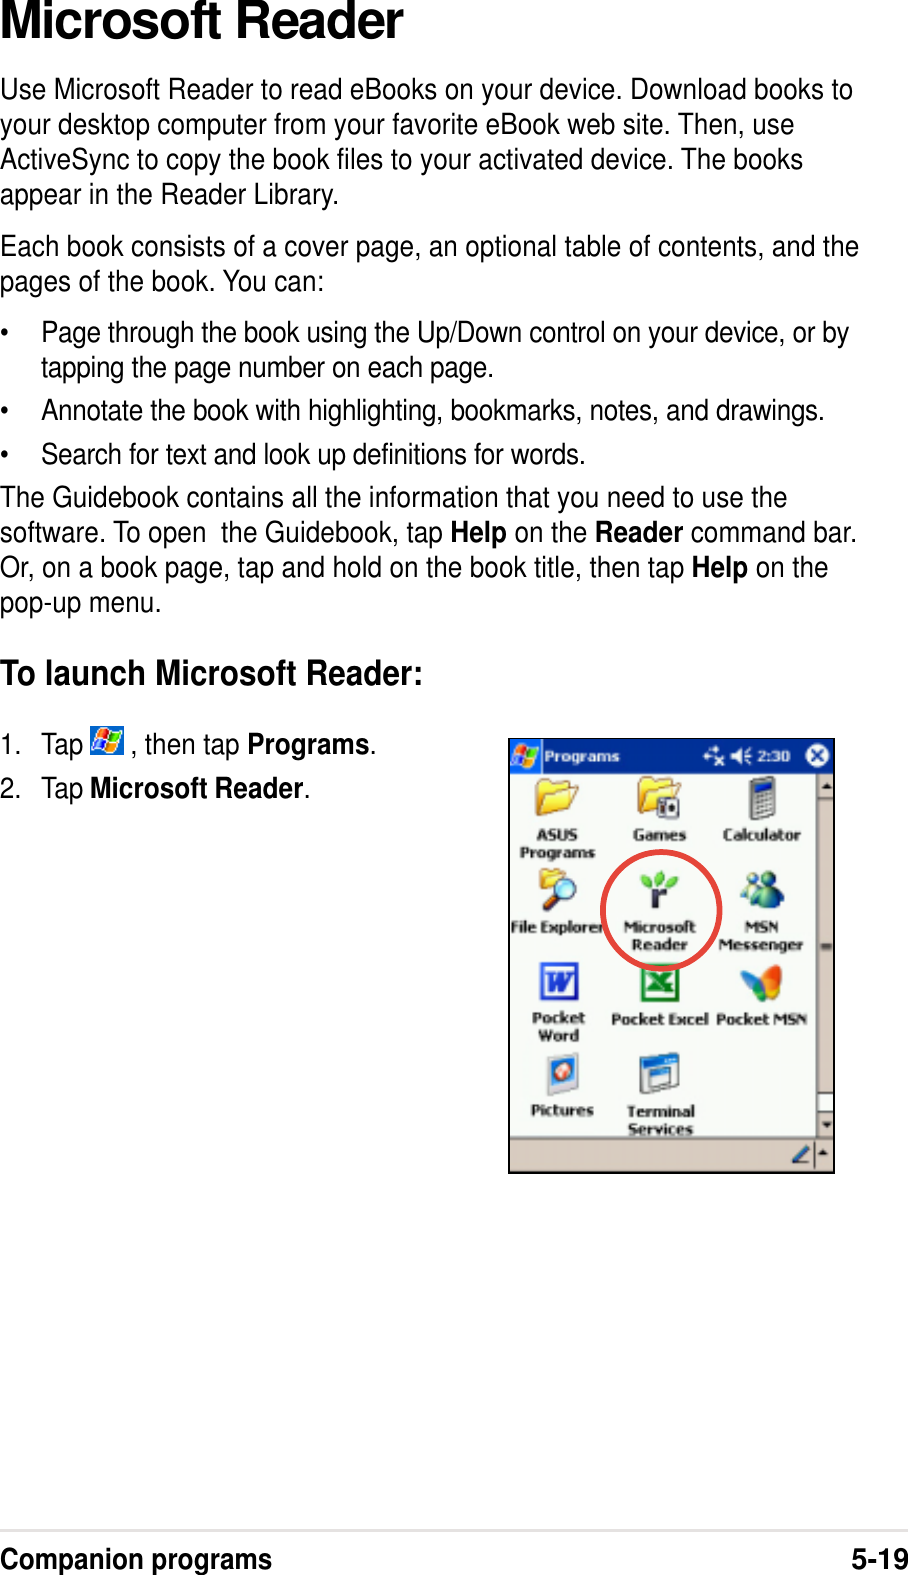 Companion programs5-19Microsoft ReaderUse Microsoft Reader to read eBooks on your device. Download books toyour desktop computer from your favorite eBook web site. Then, useActiveSync to copy the book files to your activated device. The booksappear in the Reader Library.Each book consists of a cover page, an optional table of contents, and thepages of the book. You can:•Page through the book using the Up/Down control on your device, or bytapping the page number on each page.•Annotate the book with highlighting, bookmarks, notes, and drawings.•Search for text and look up definitions for words.The Guidebook contains all the information that you need to use thesoftware. To open  the Guidebook, tap Help on the Reader command bar.Or, on a book page, tap and hold on the book title, then tap Help on thepop-up menu.To launch Microsoft Reader:1. Tap   , then tap Programs.2. Tap Microsoft Reader.